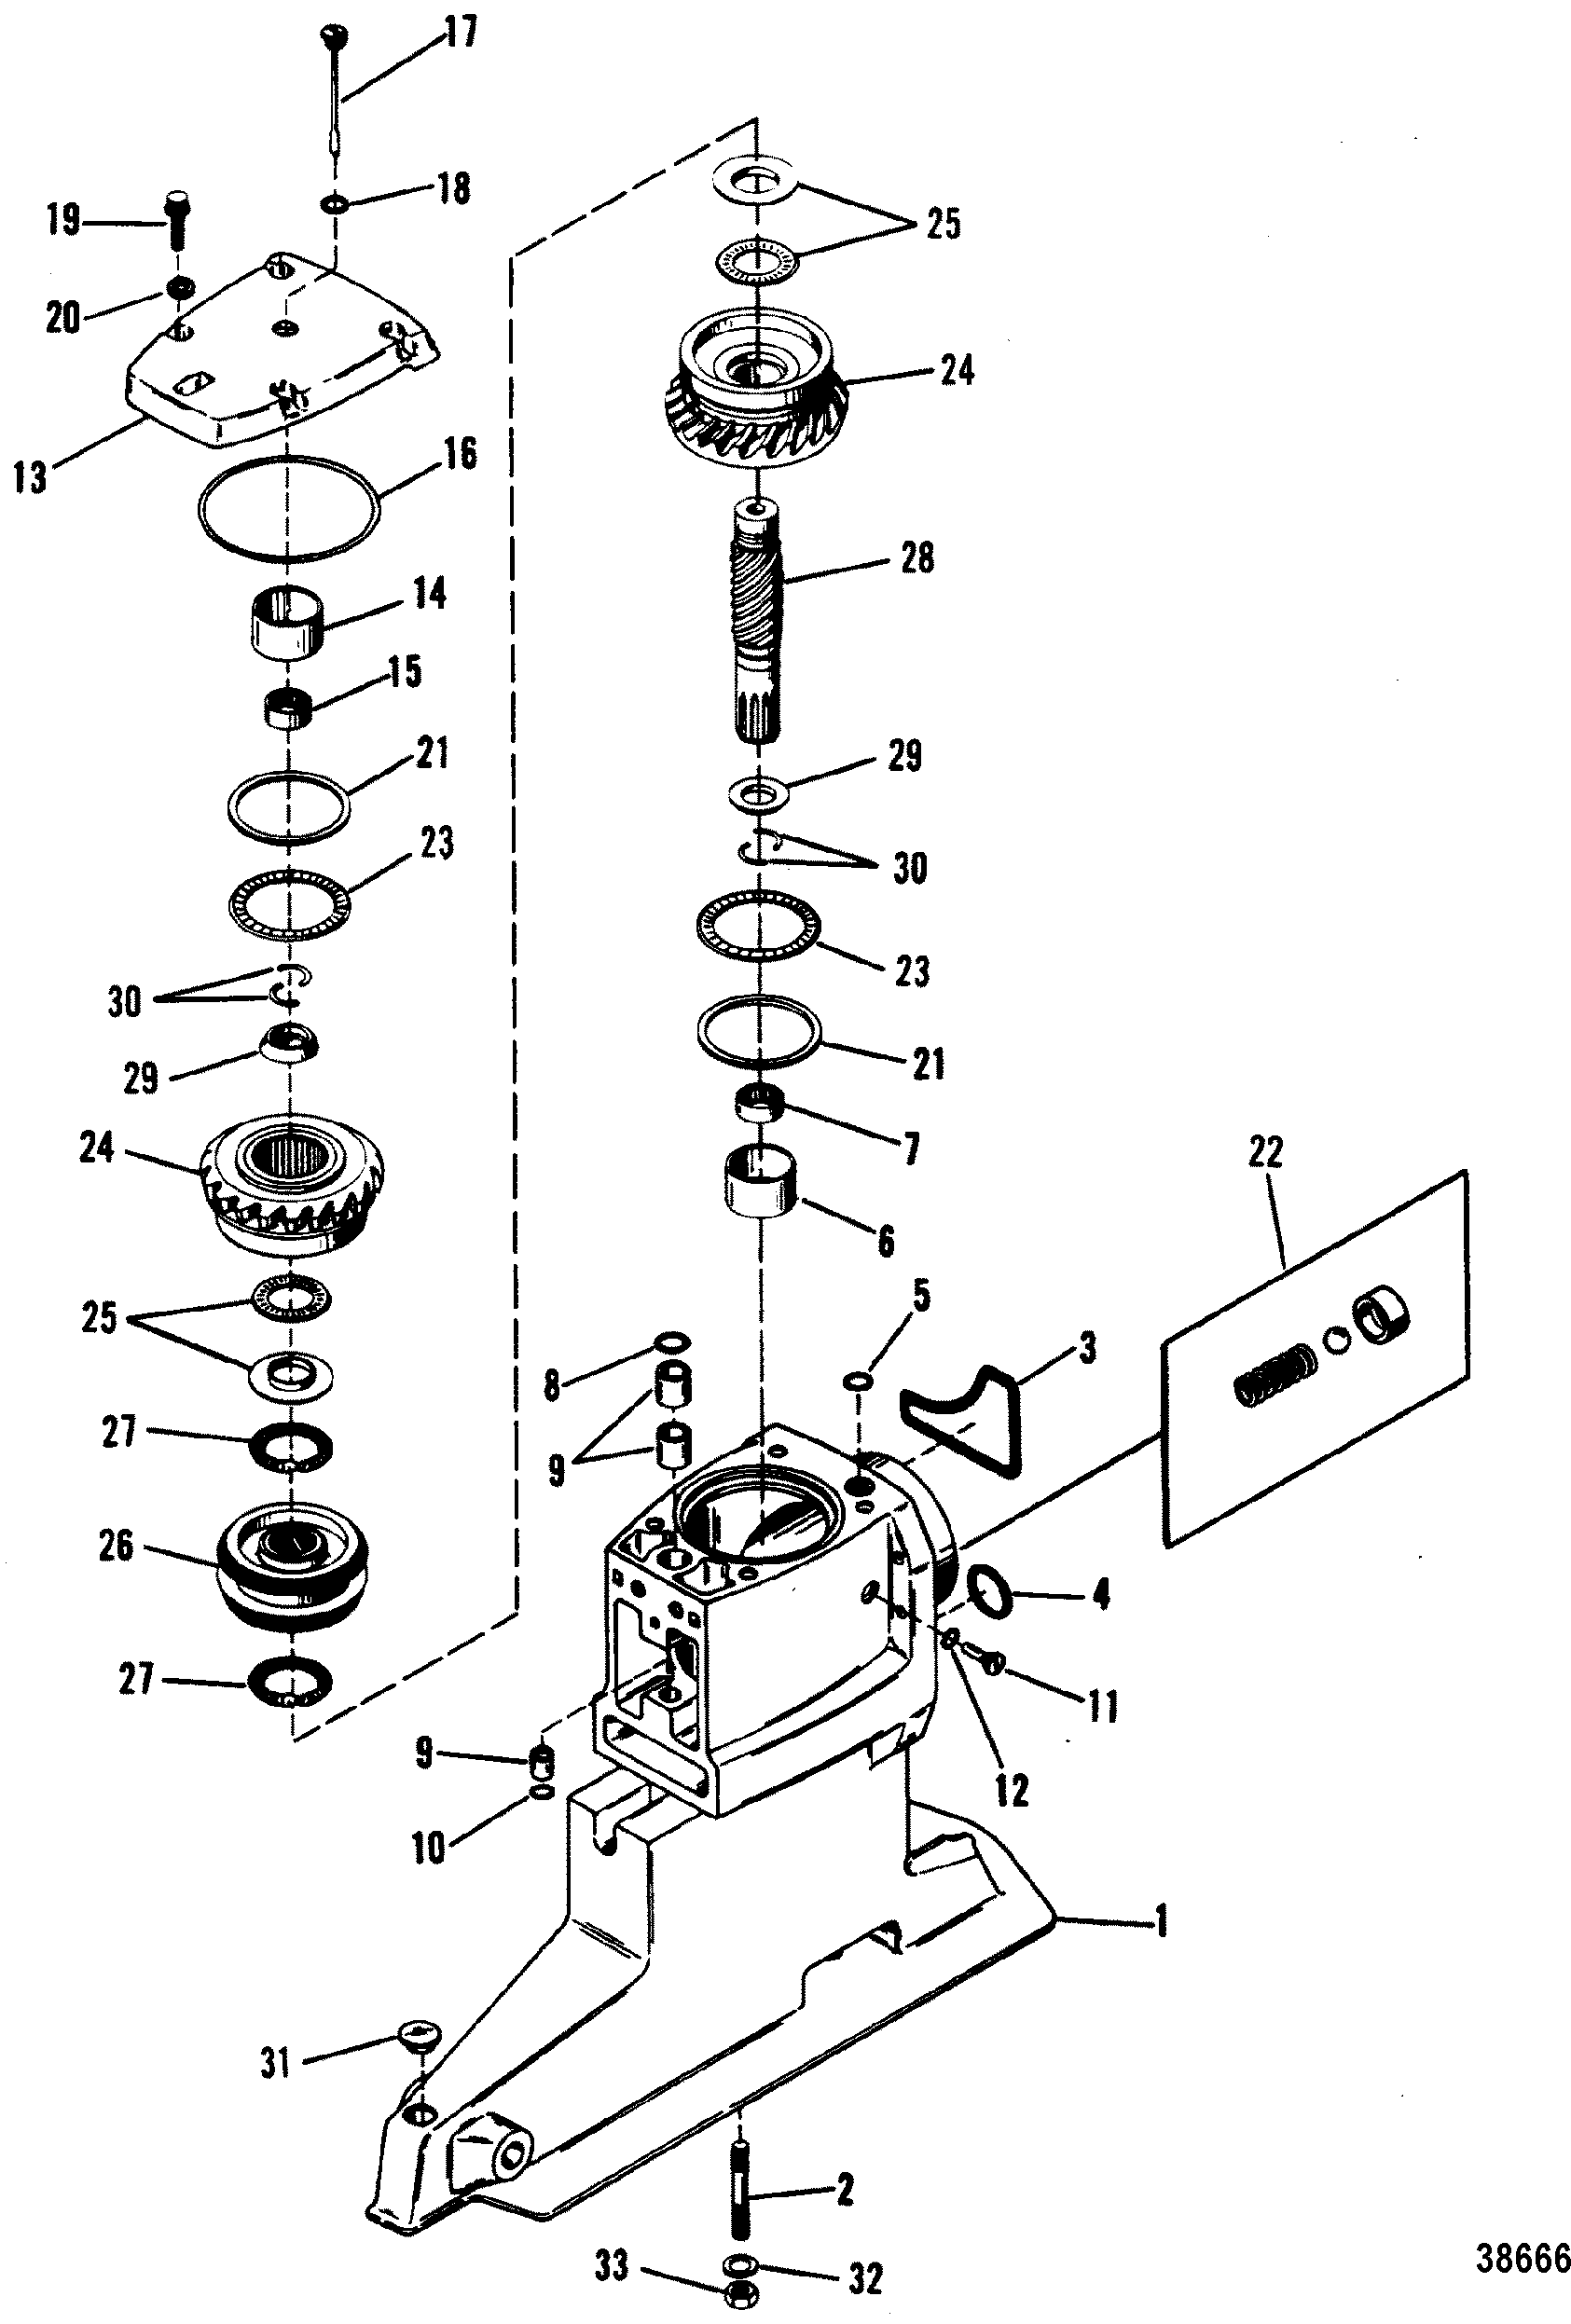 DRIVESHAFT HOUSING AND DRIVE GEARS